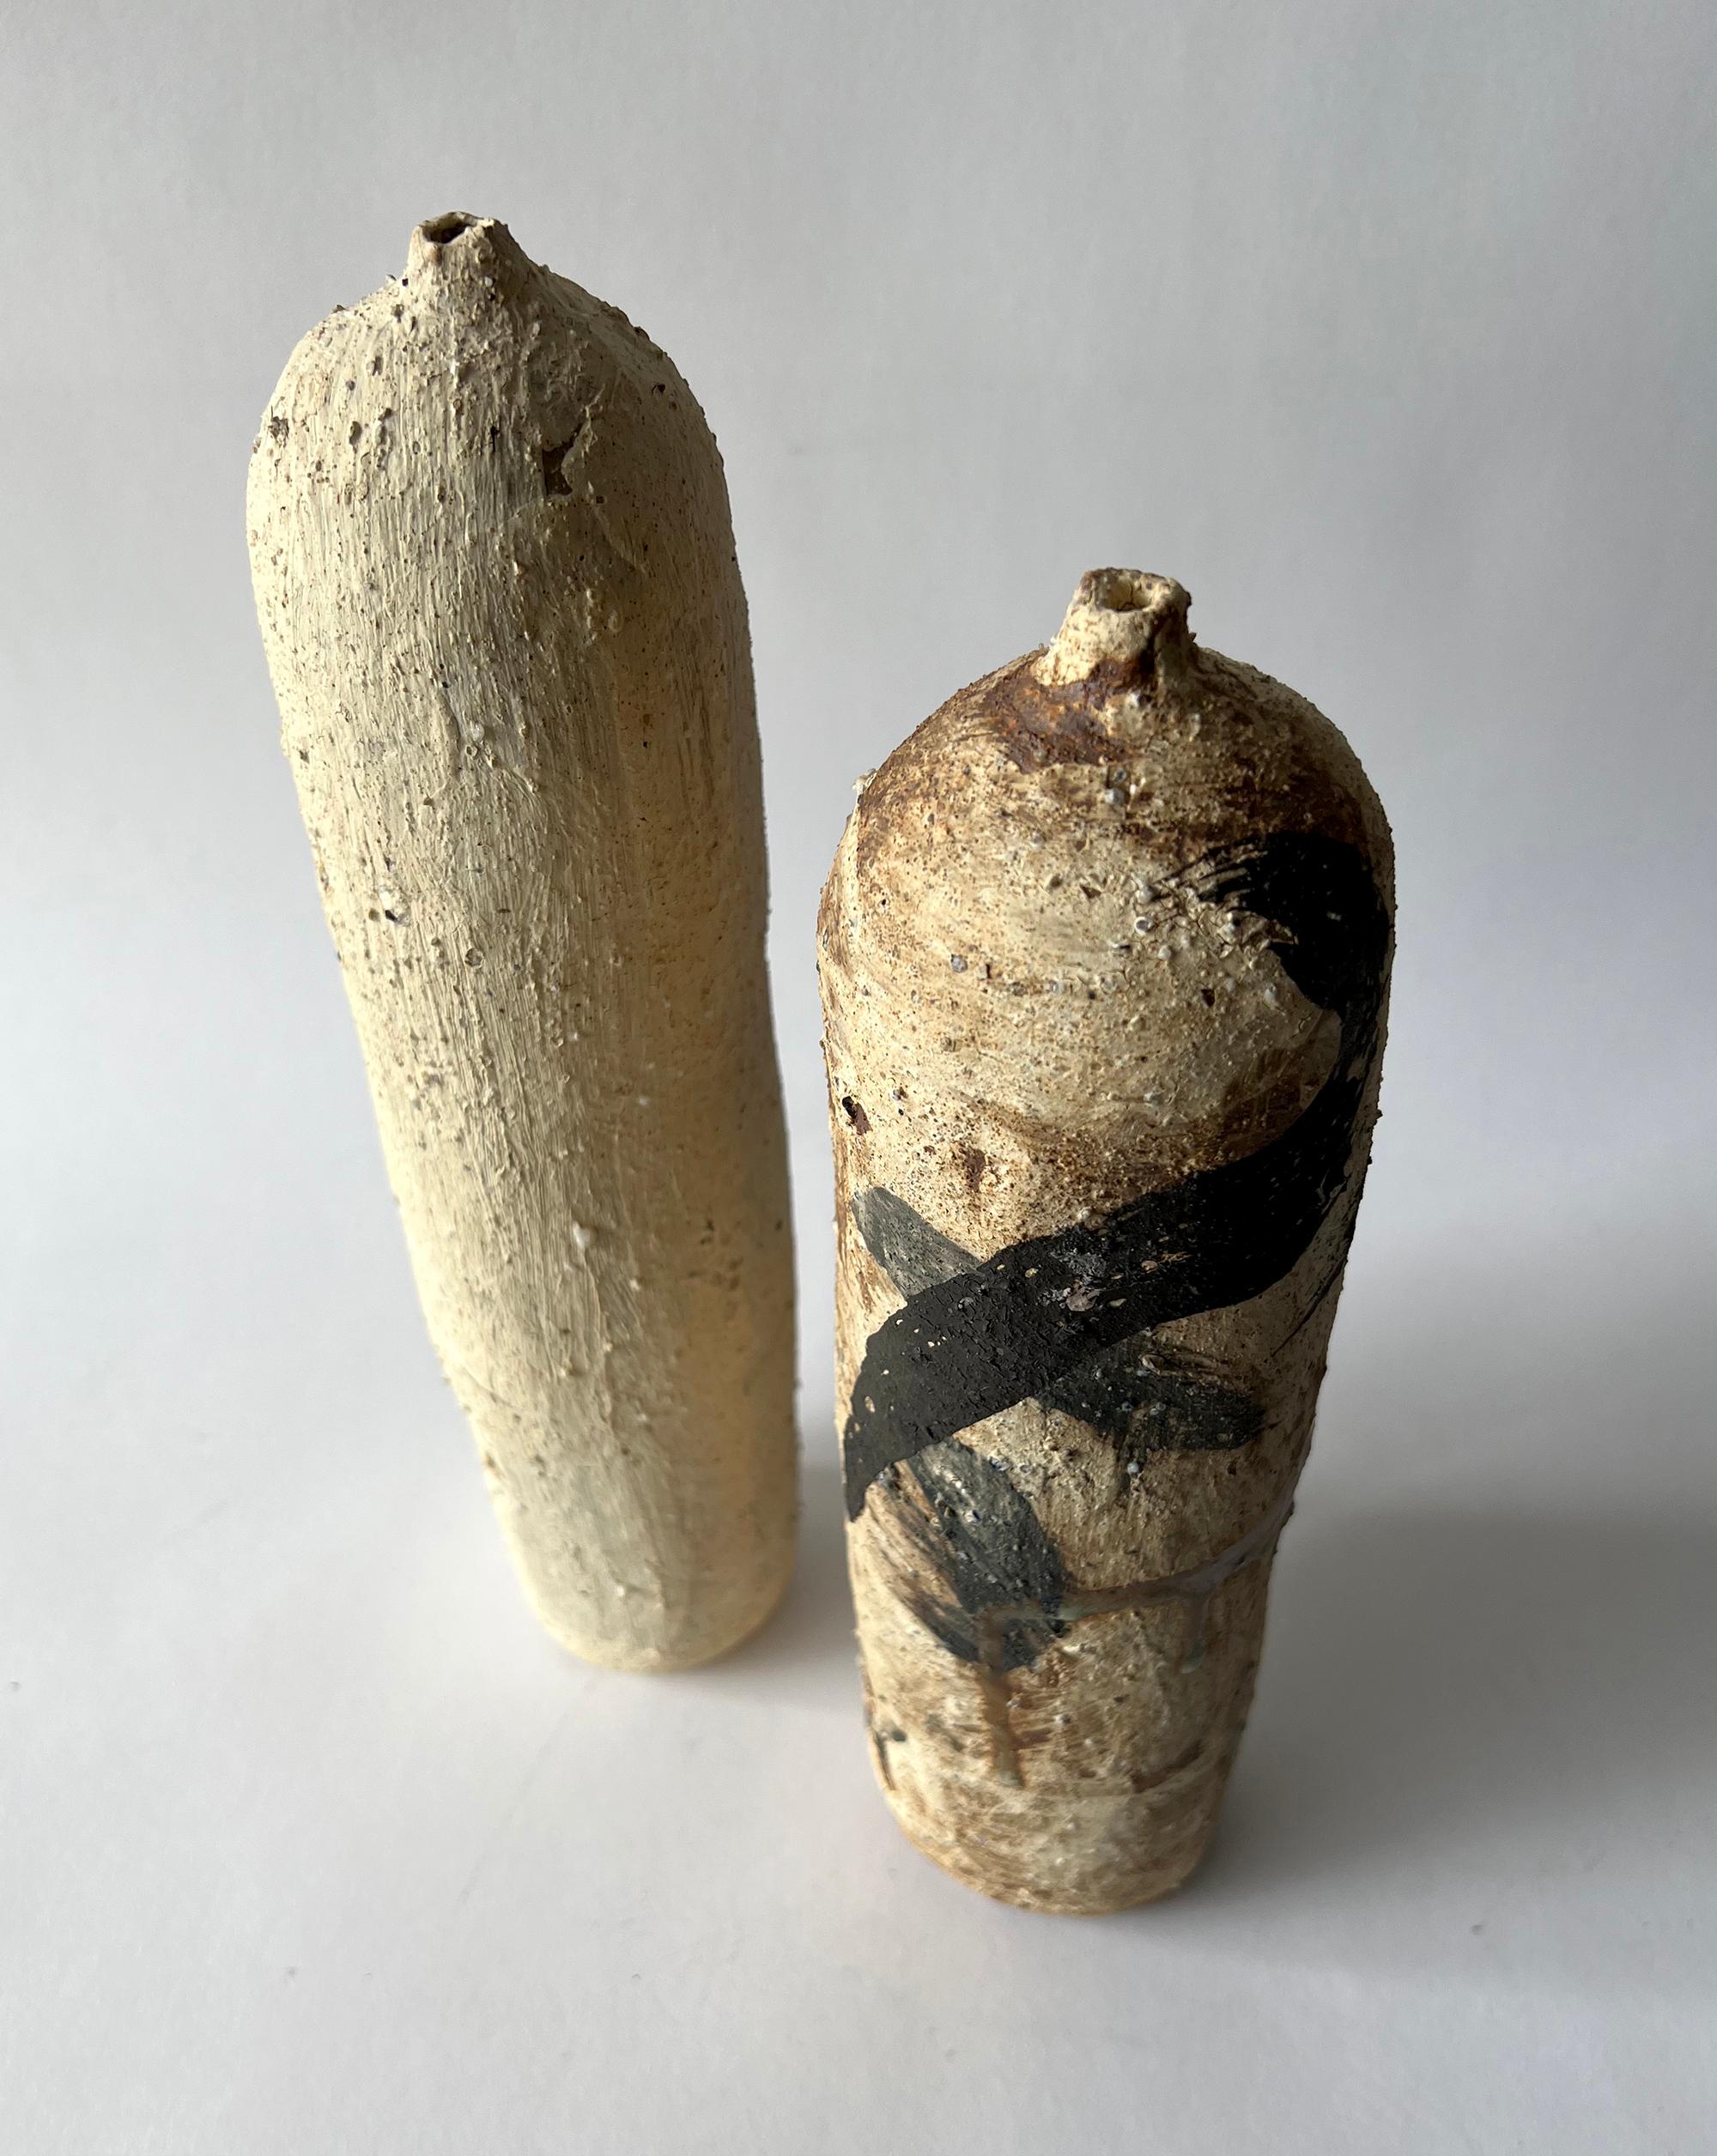 Contemporary Japanese style Shigaraki cylindrical bottle vases created by San Francisco Bay Area artist Justin Hoffman. Bottle heights are 11.75